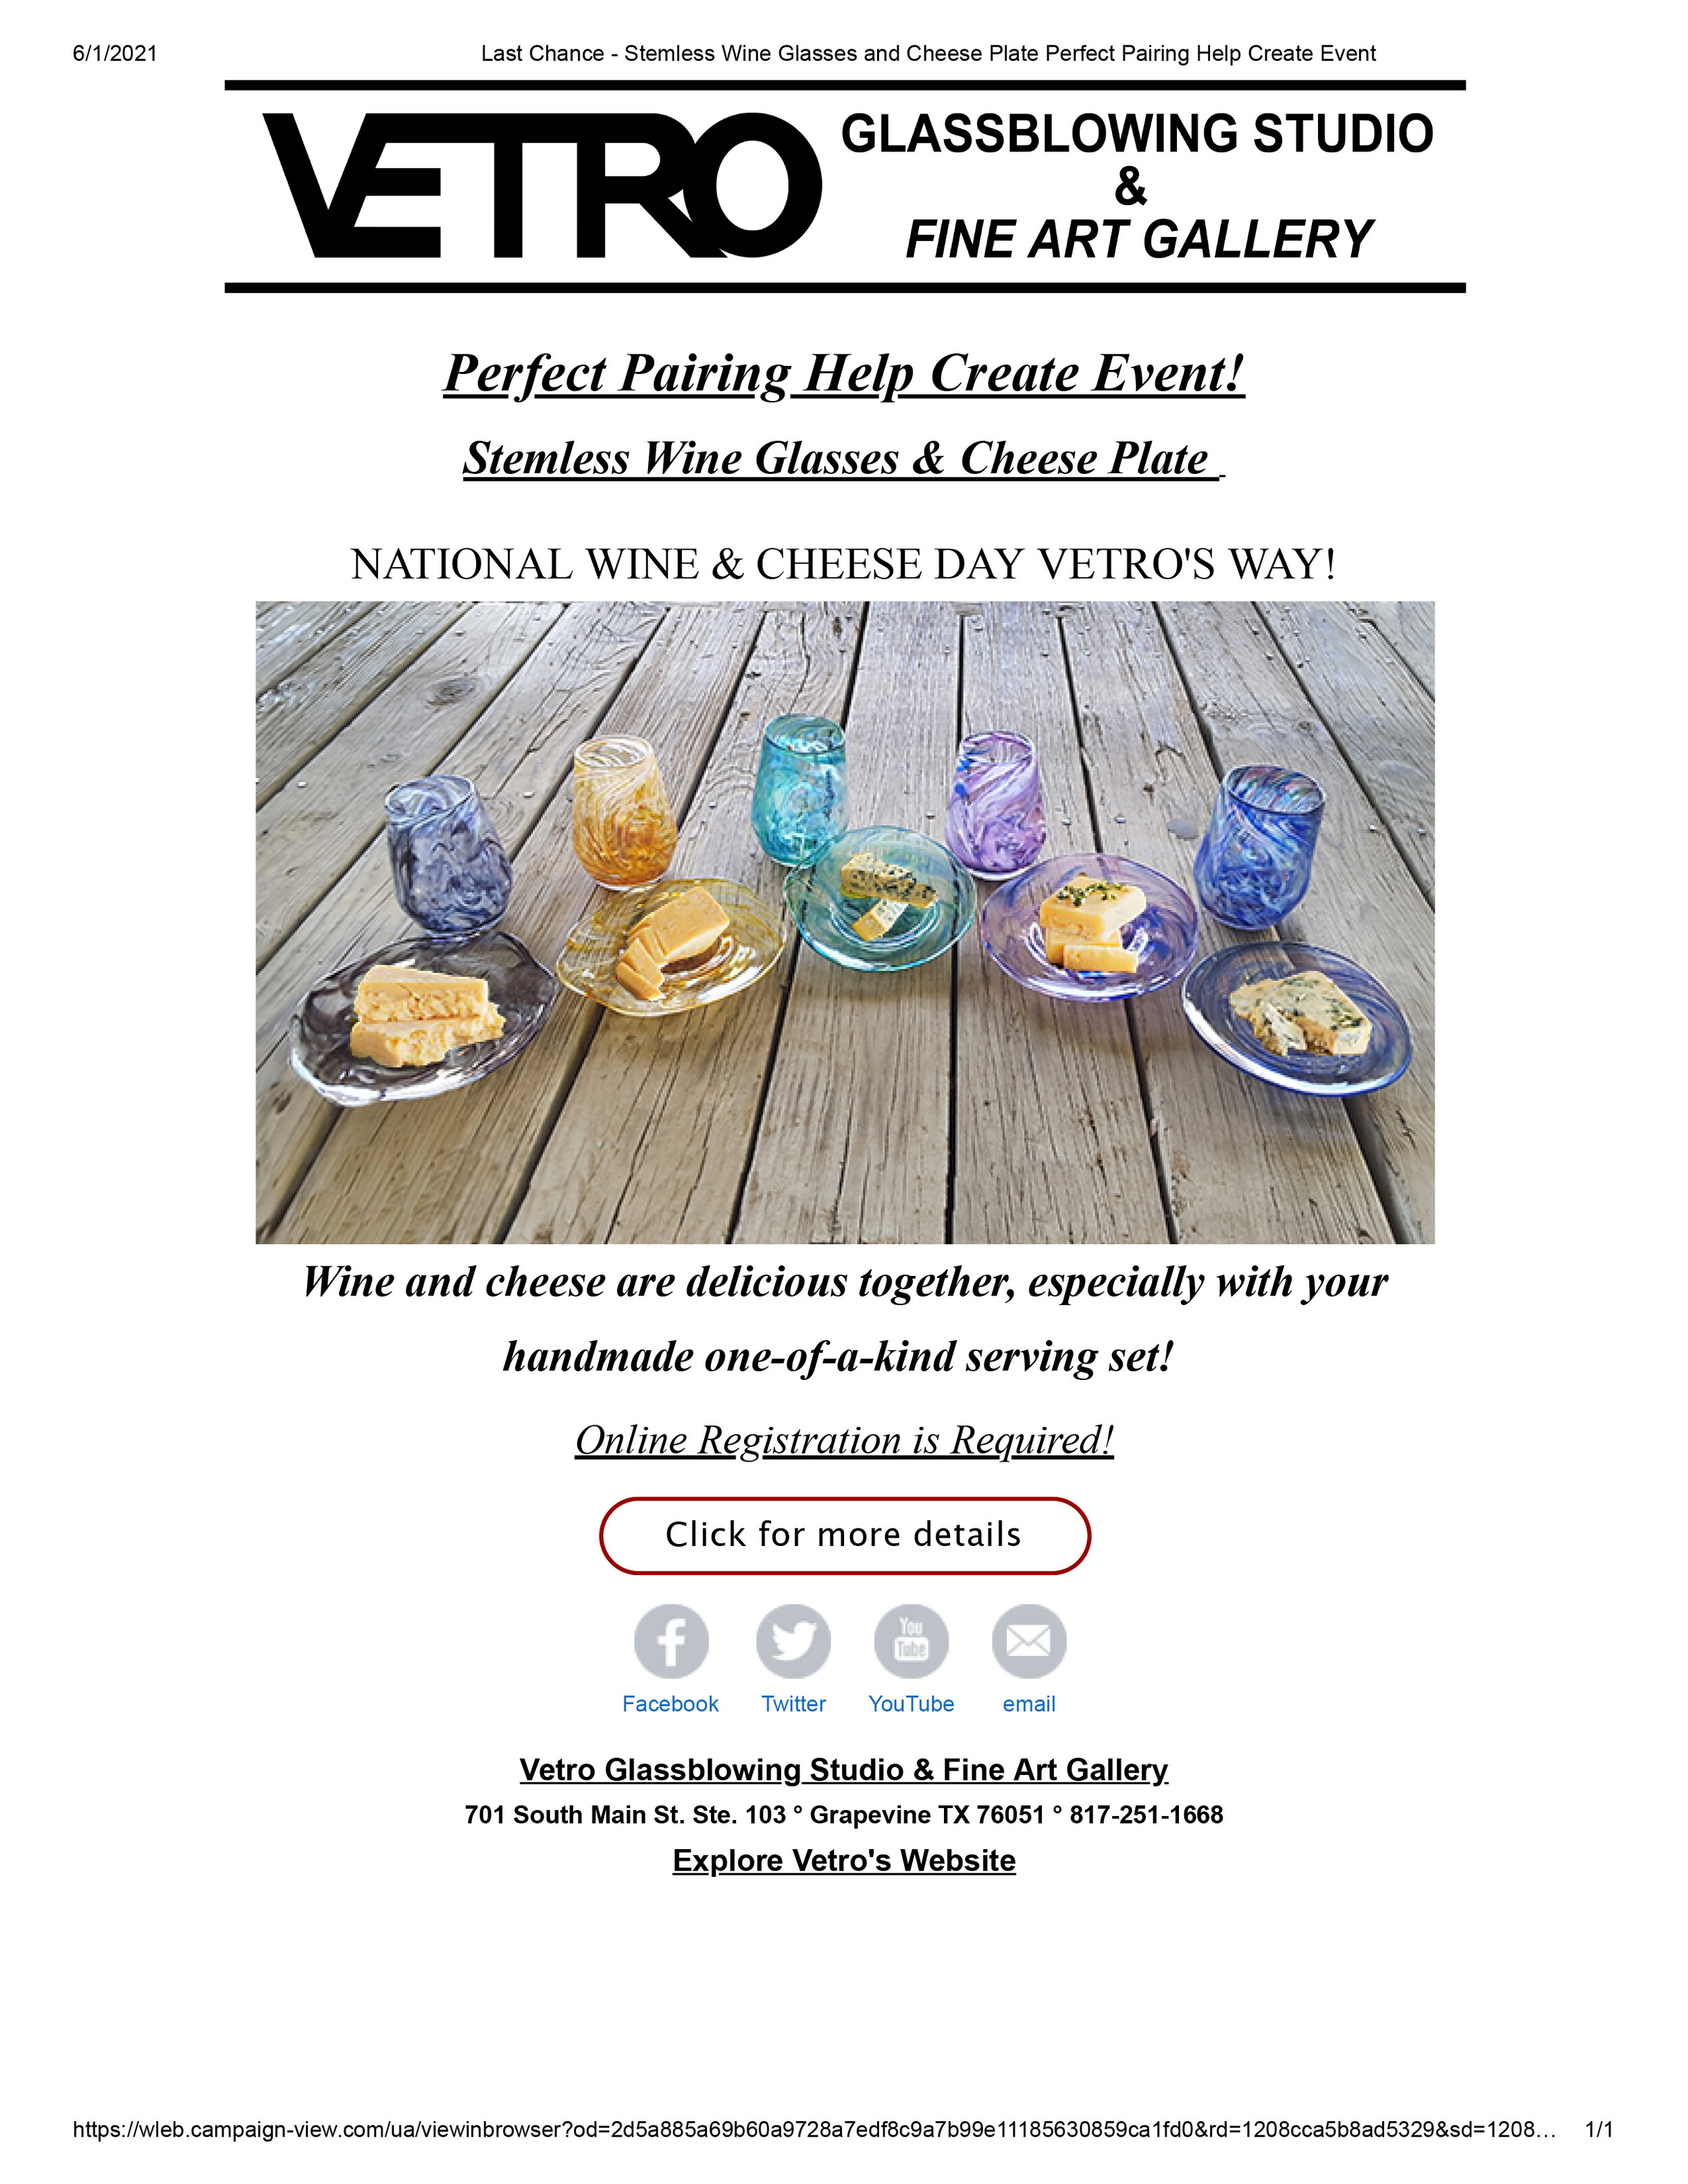 Email Campaigns -Vetro Glassblowing Studio - NATIONAL WINE AND CHEESE DAY VETROS WAY.jpg